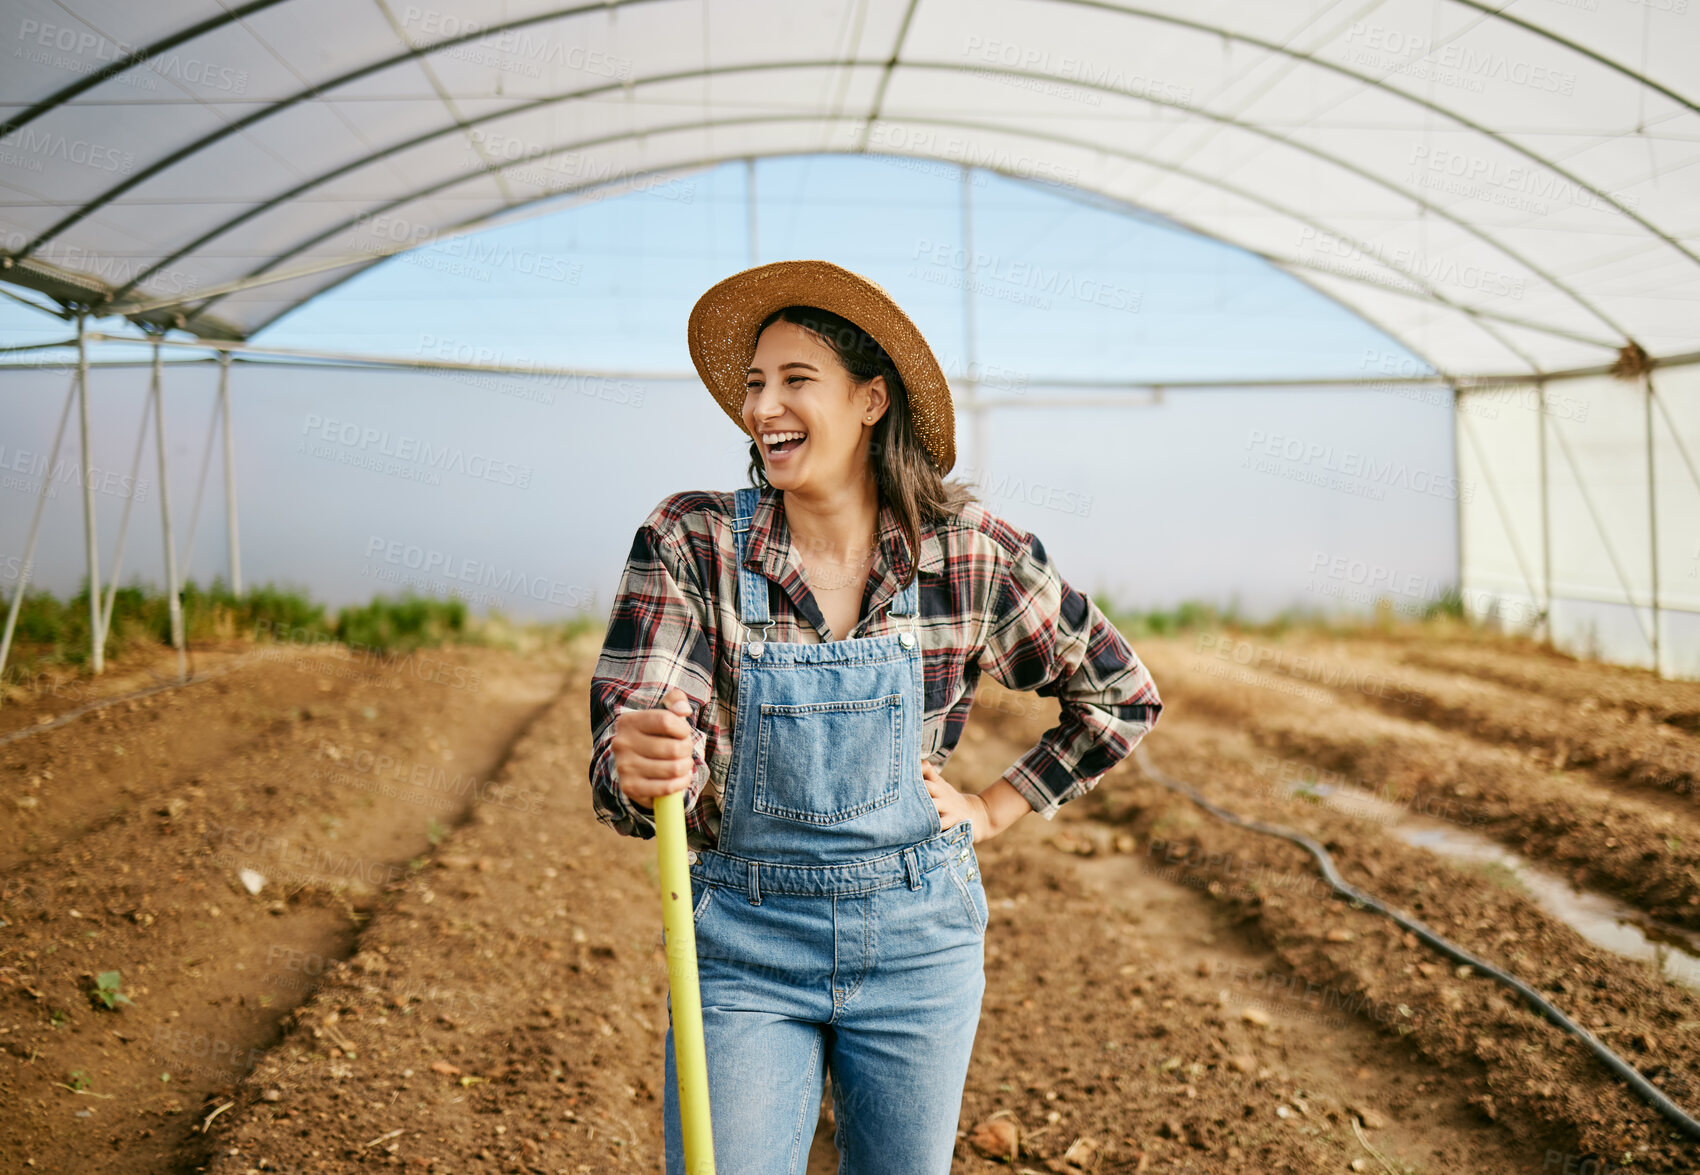 Buy stock photo Shot of a young female farmer working in her greenhouse